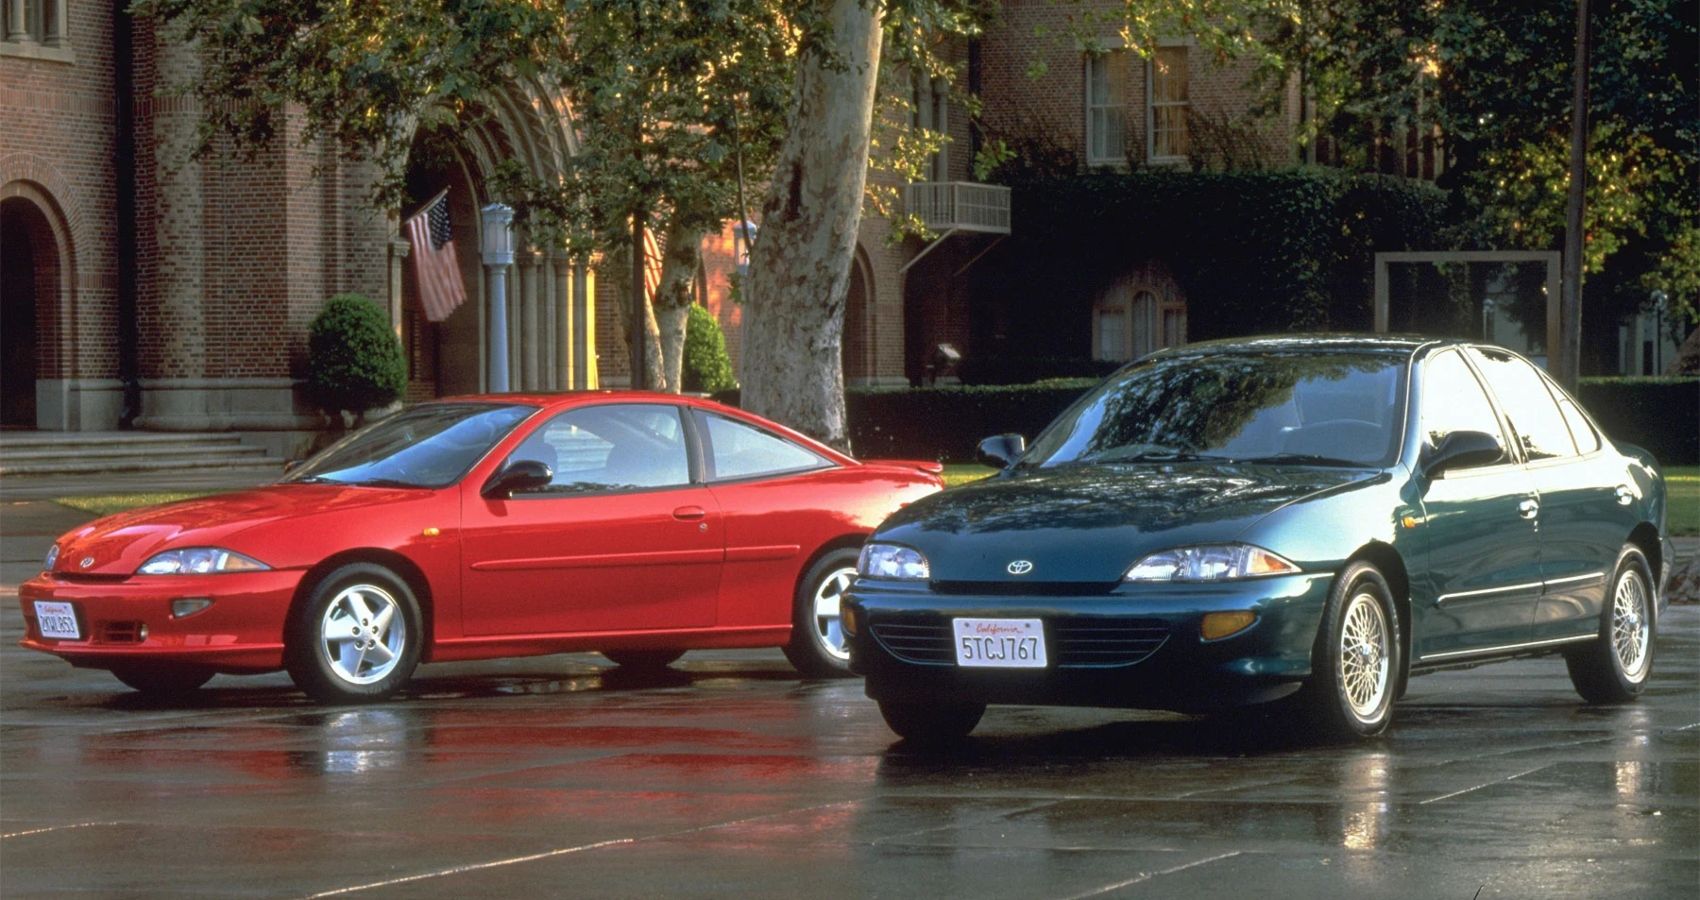 The Toyota Cavalier Was The Result Of A Poor American-Japanese Brand Partnership